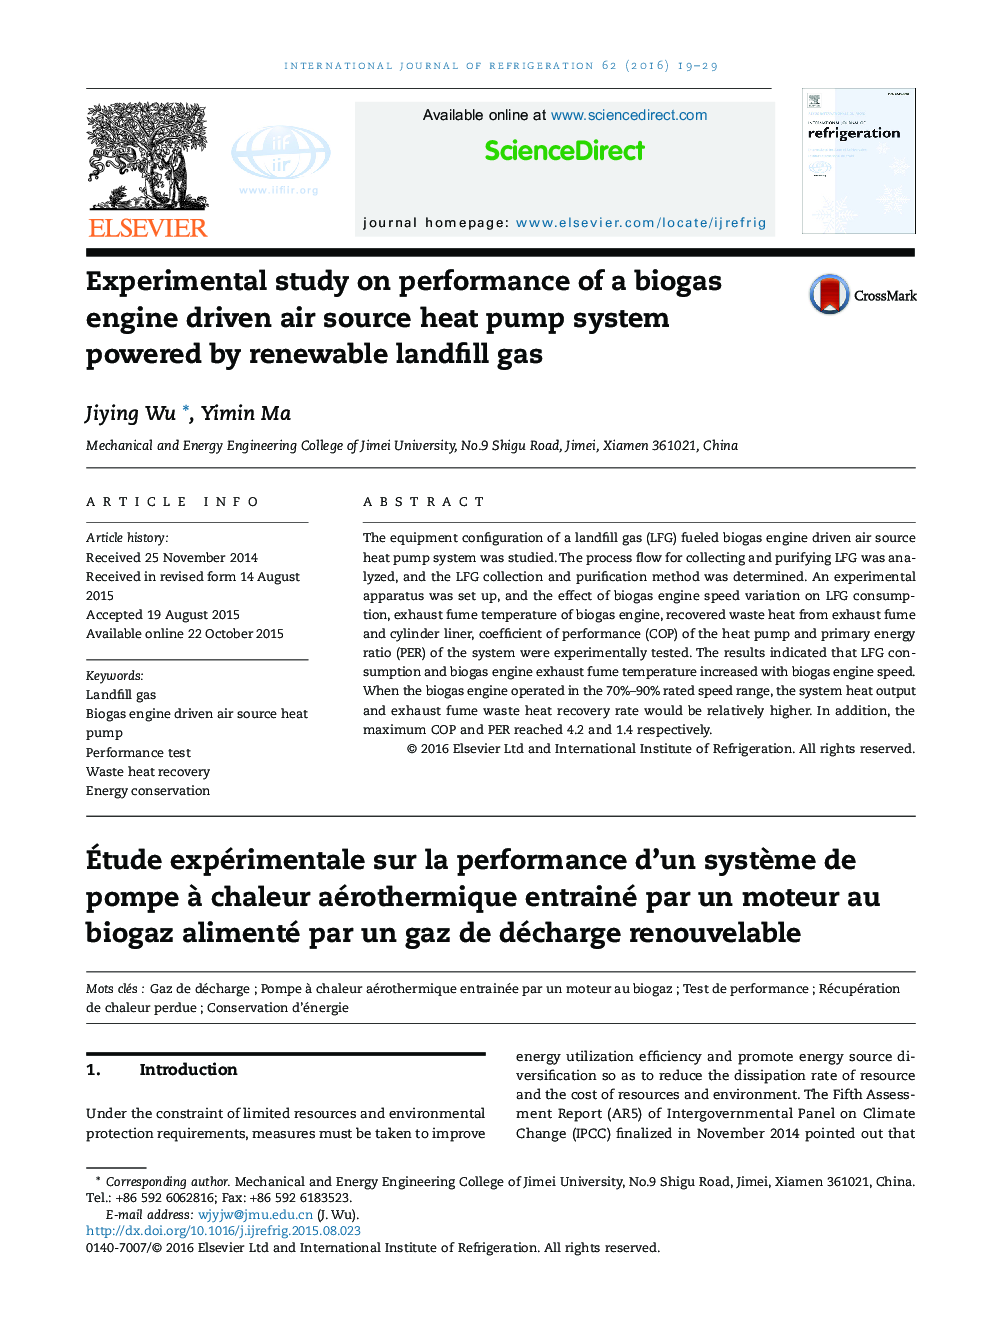 Experimental study on performance of a biogas engine driven air source heat pump system powered by renewable landfill gas